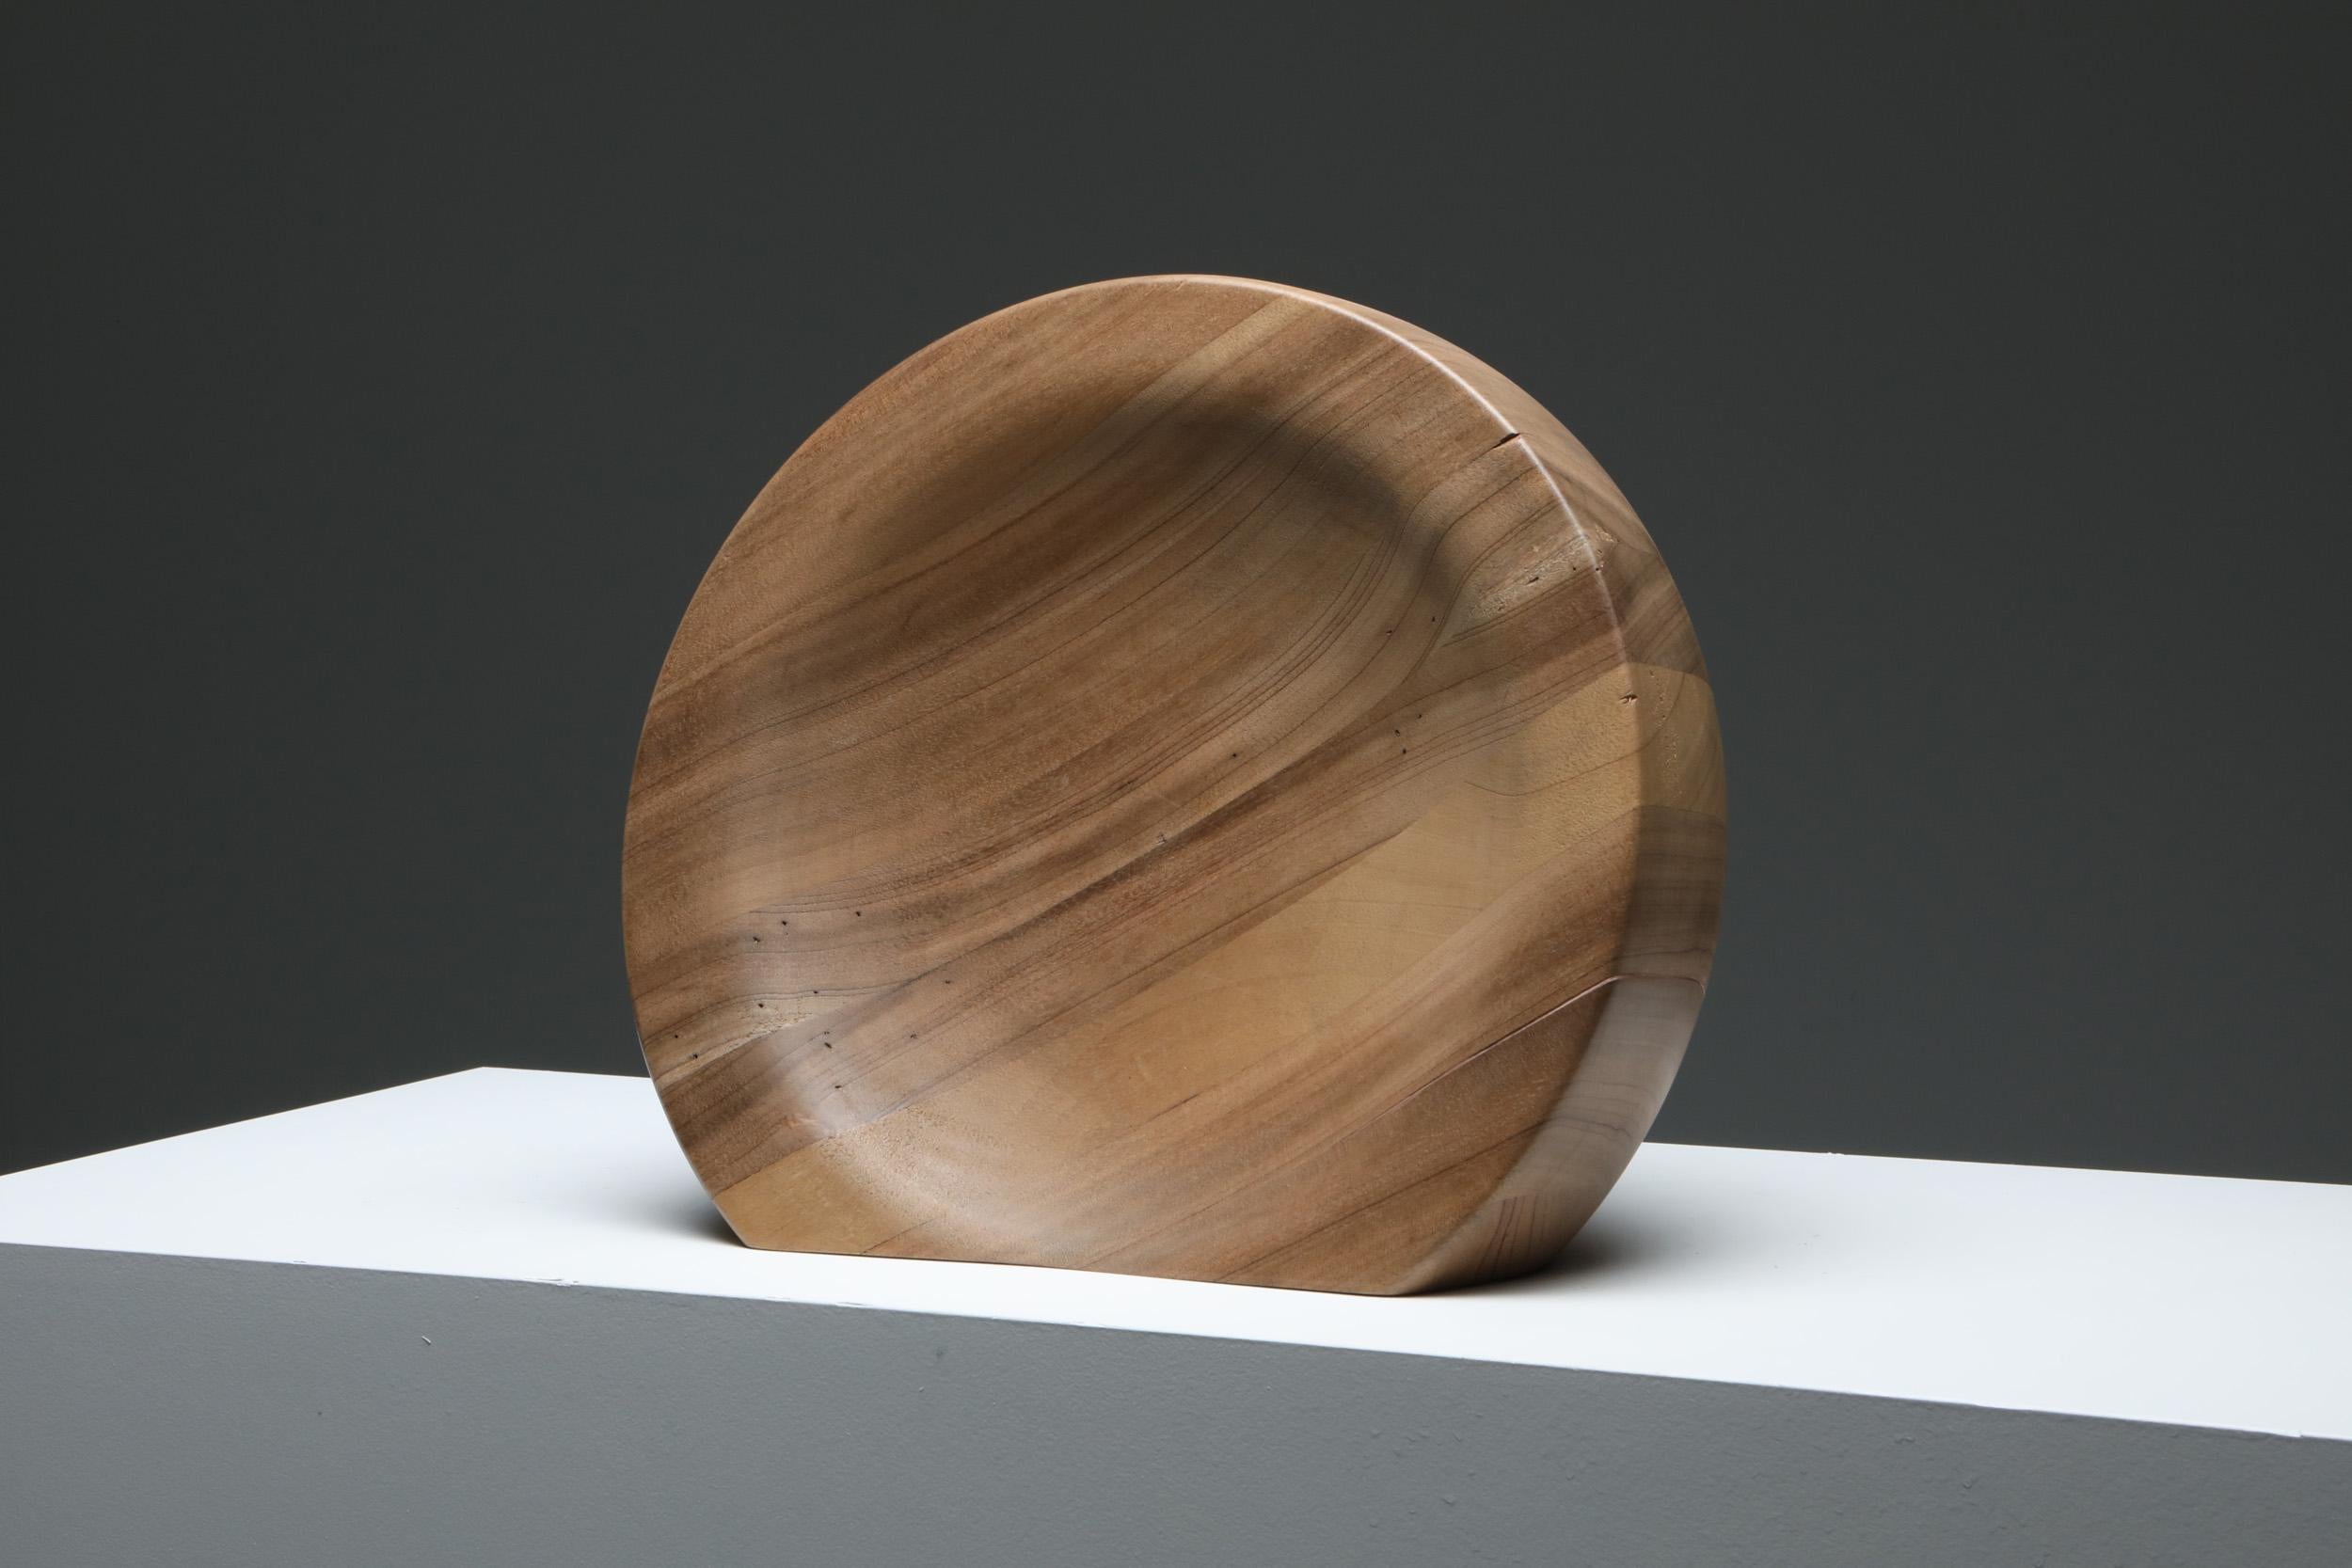 Arno Declercq; Belgian design; handcrafted

Made in African walnut, sanded and finished with varnish
43 cm wide x 43 cm long x 15 cm high / 17” wide x 17” long x 6” high

Belgian designer and art dealer, born in 1994, who makes bespoke objects